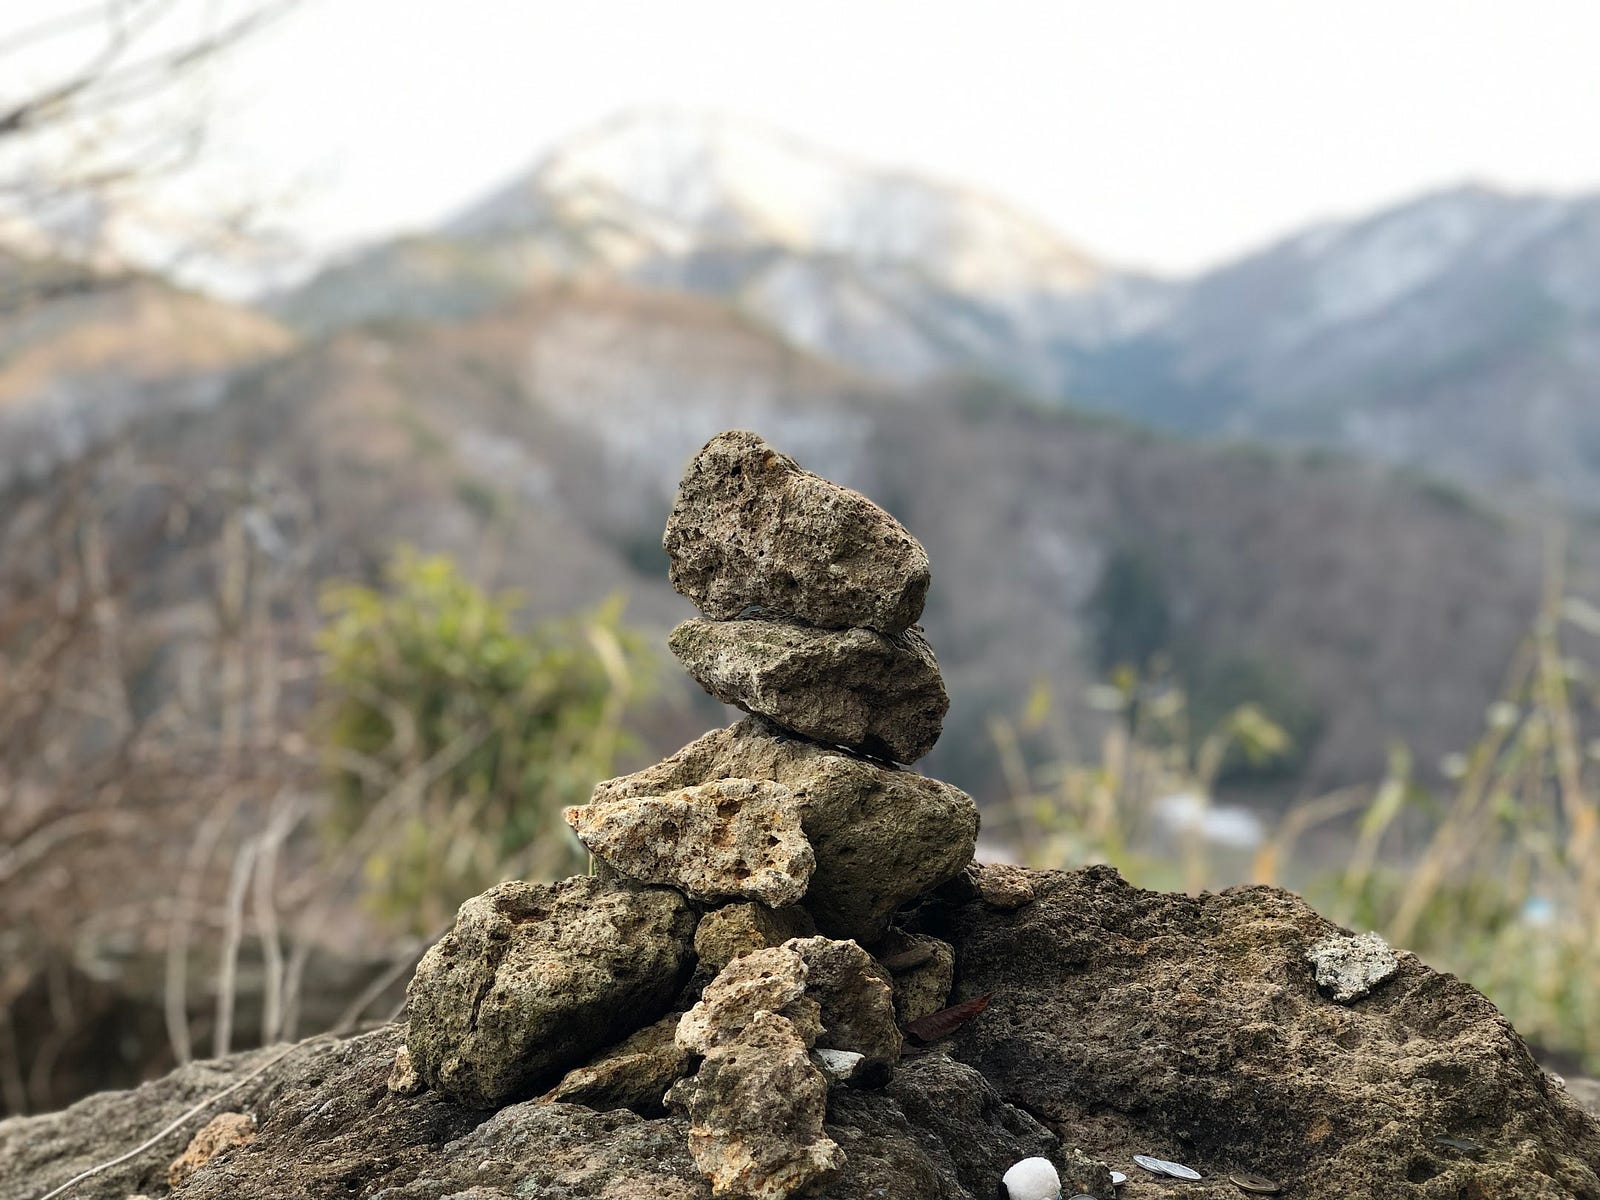 Rocks stacked on top of each other with a mountain in the background. Sights such as these are common in Japan, especially on Zao-san (Mt. Zao) where Jizo-dake lies.